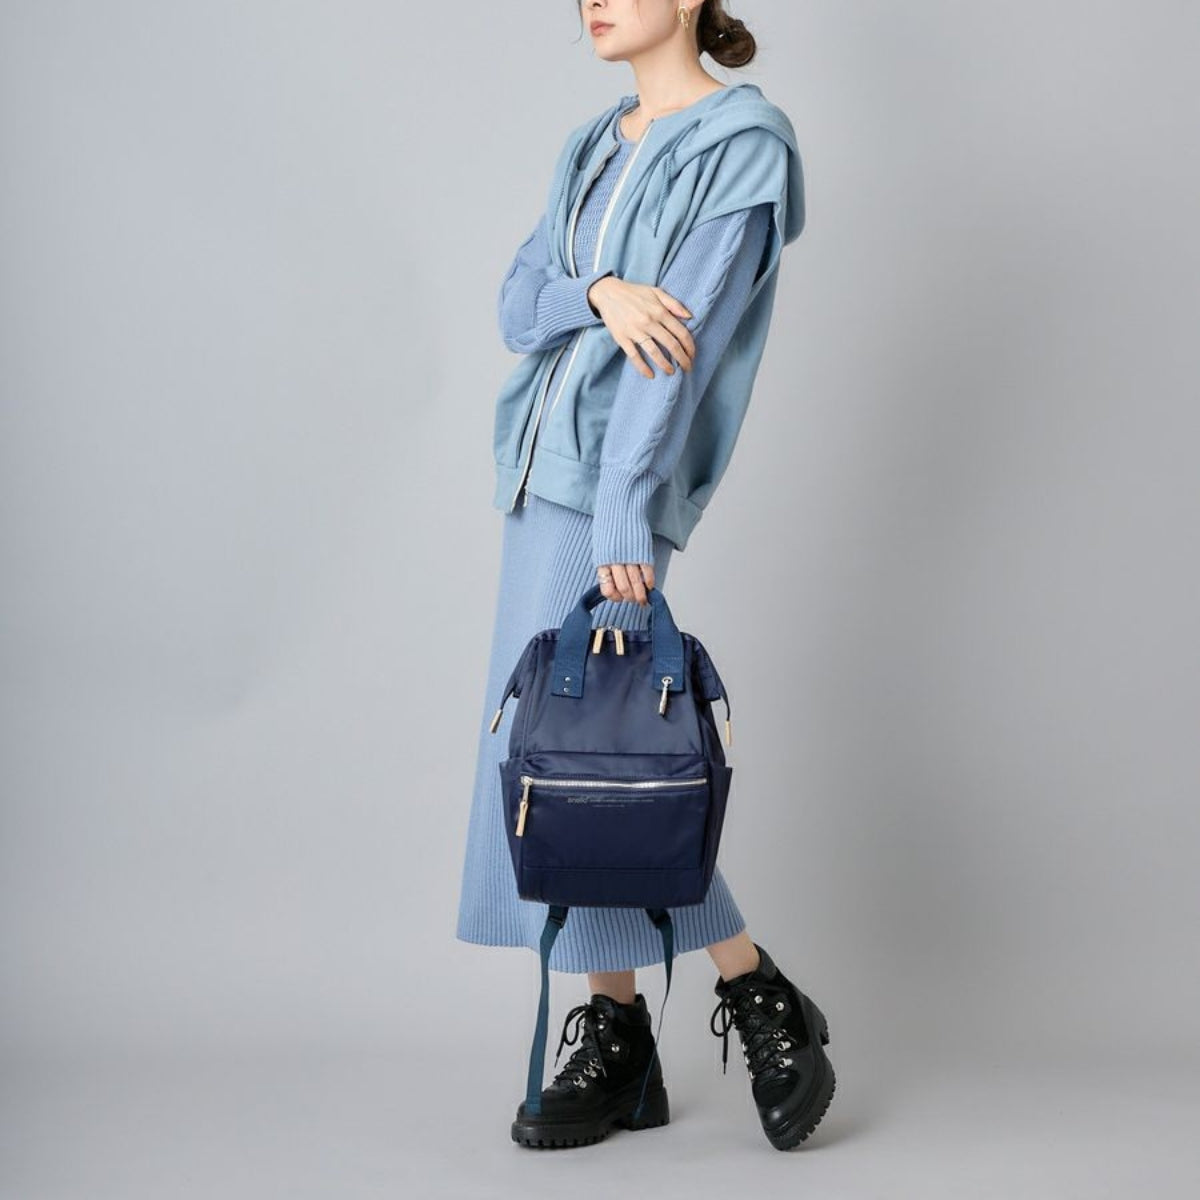 Anello Eleanor Backpack Small in Navy